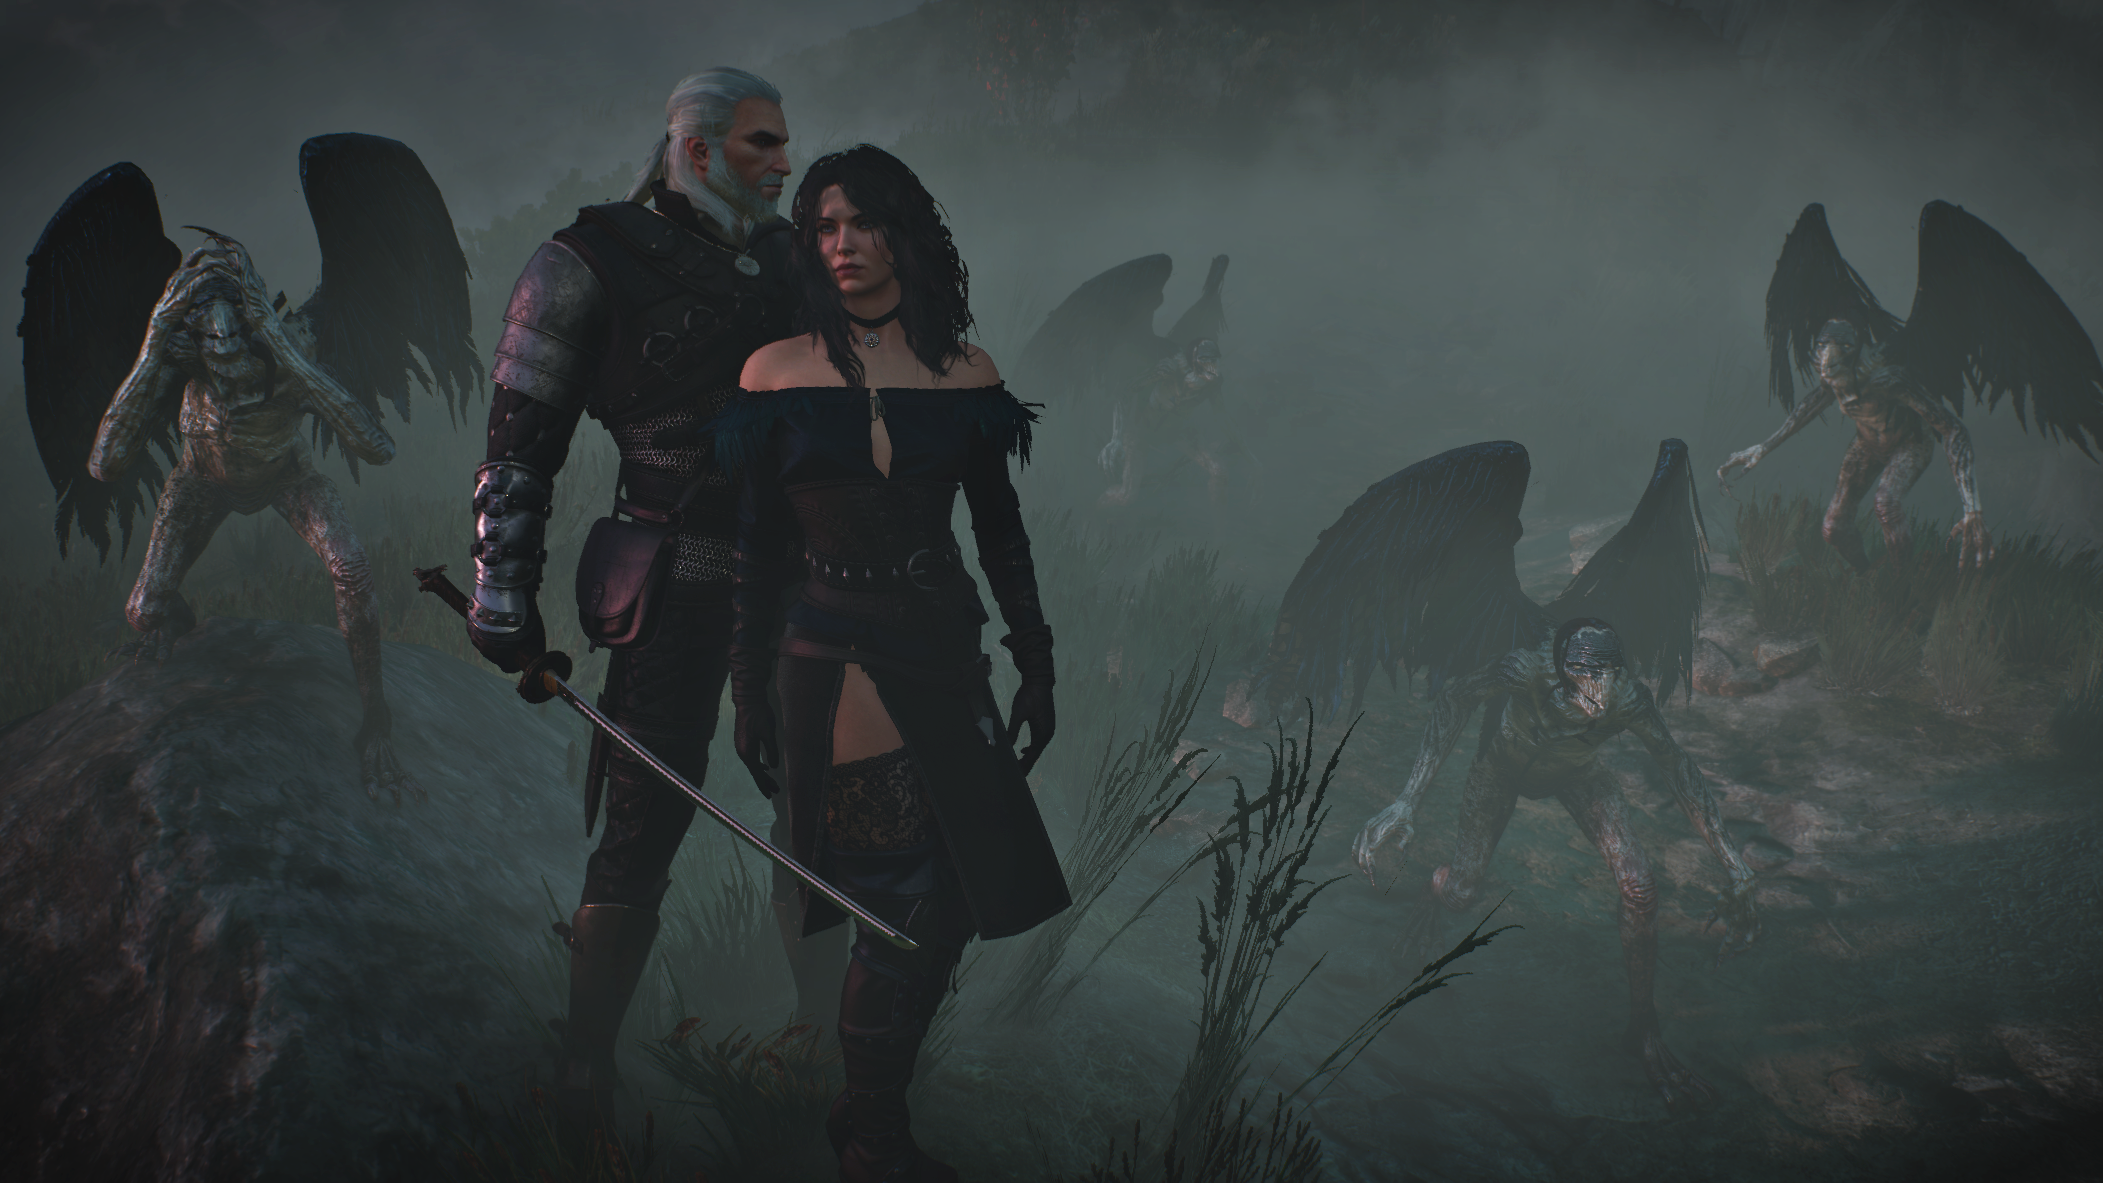 The Witcher The Witcher 3 Wild Hunt Video Games Yennefer Of Vengerberg Geralt Of Rivia 2103x1183